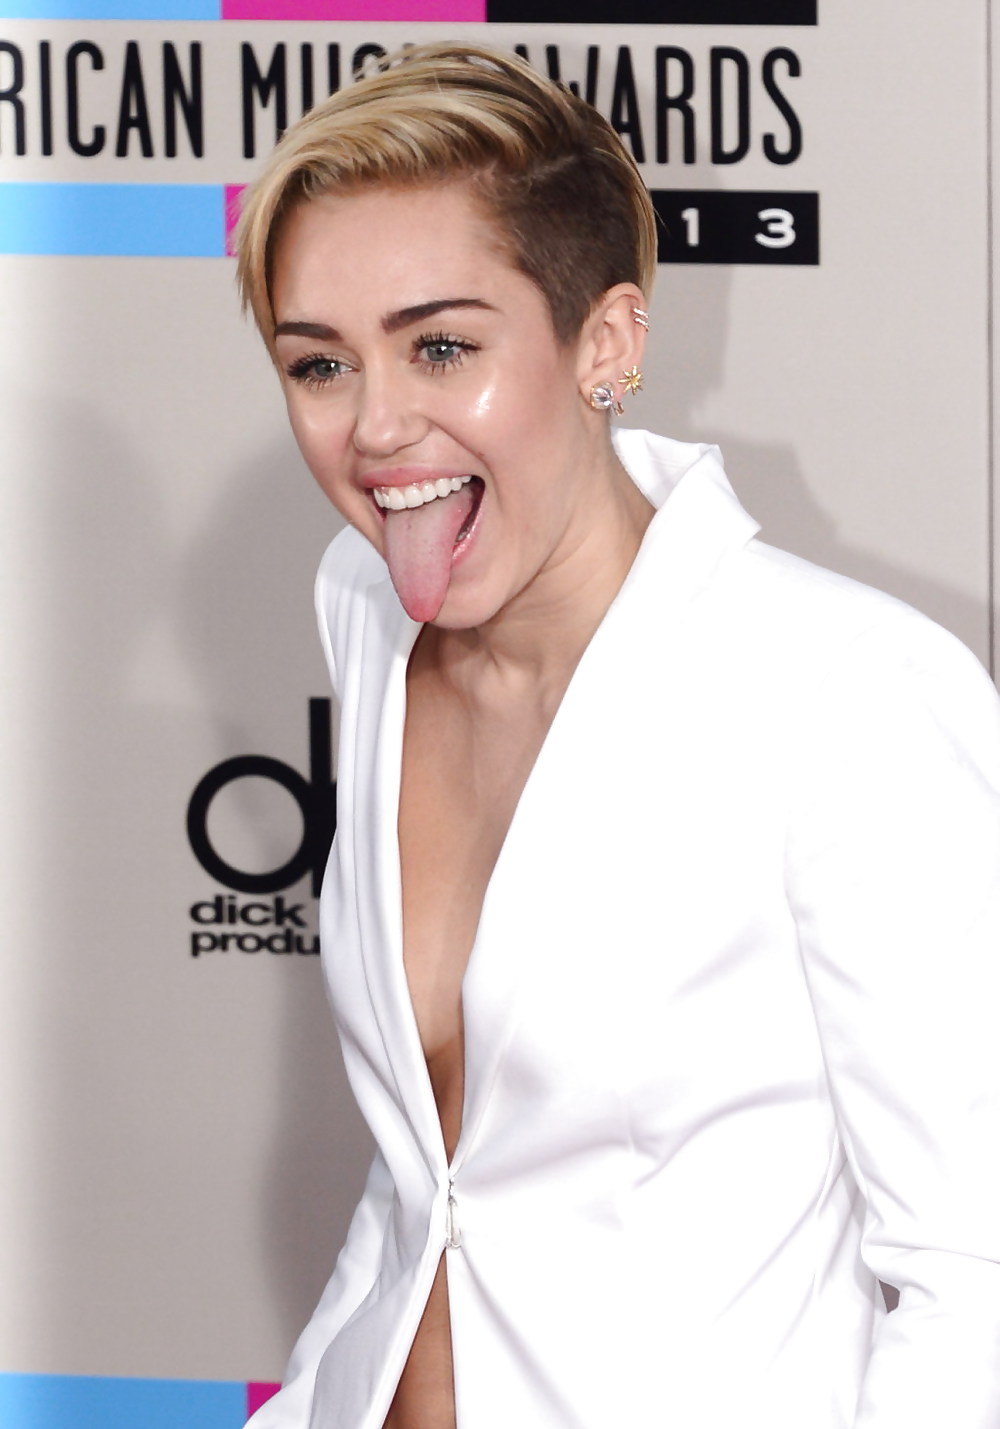 Miley cyrus sexy 2013 American Music Awards
 #36323549